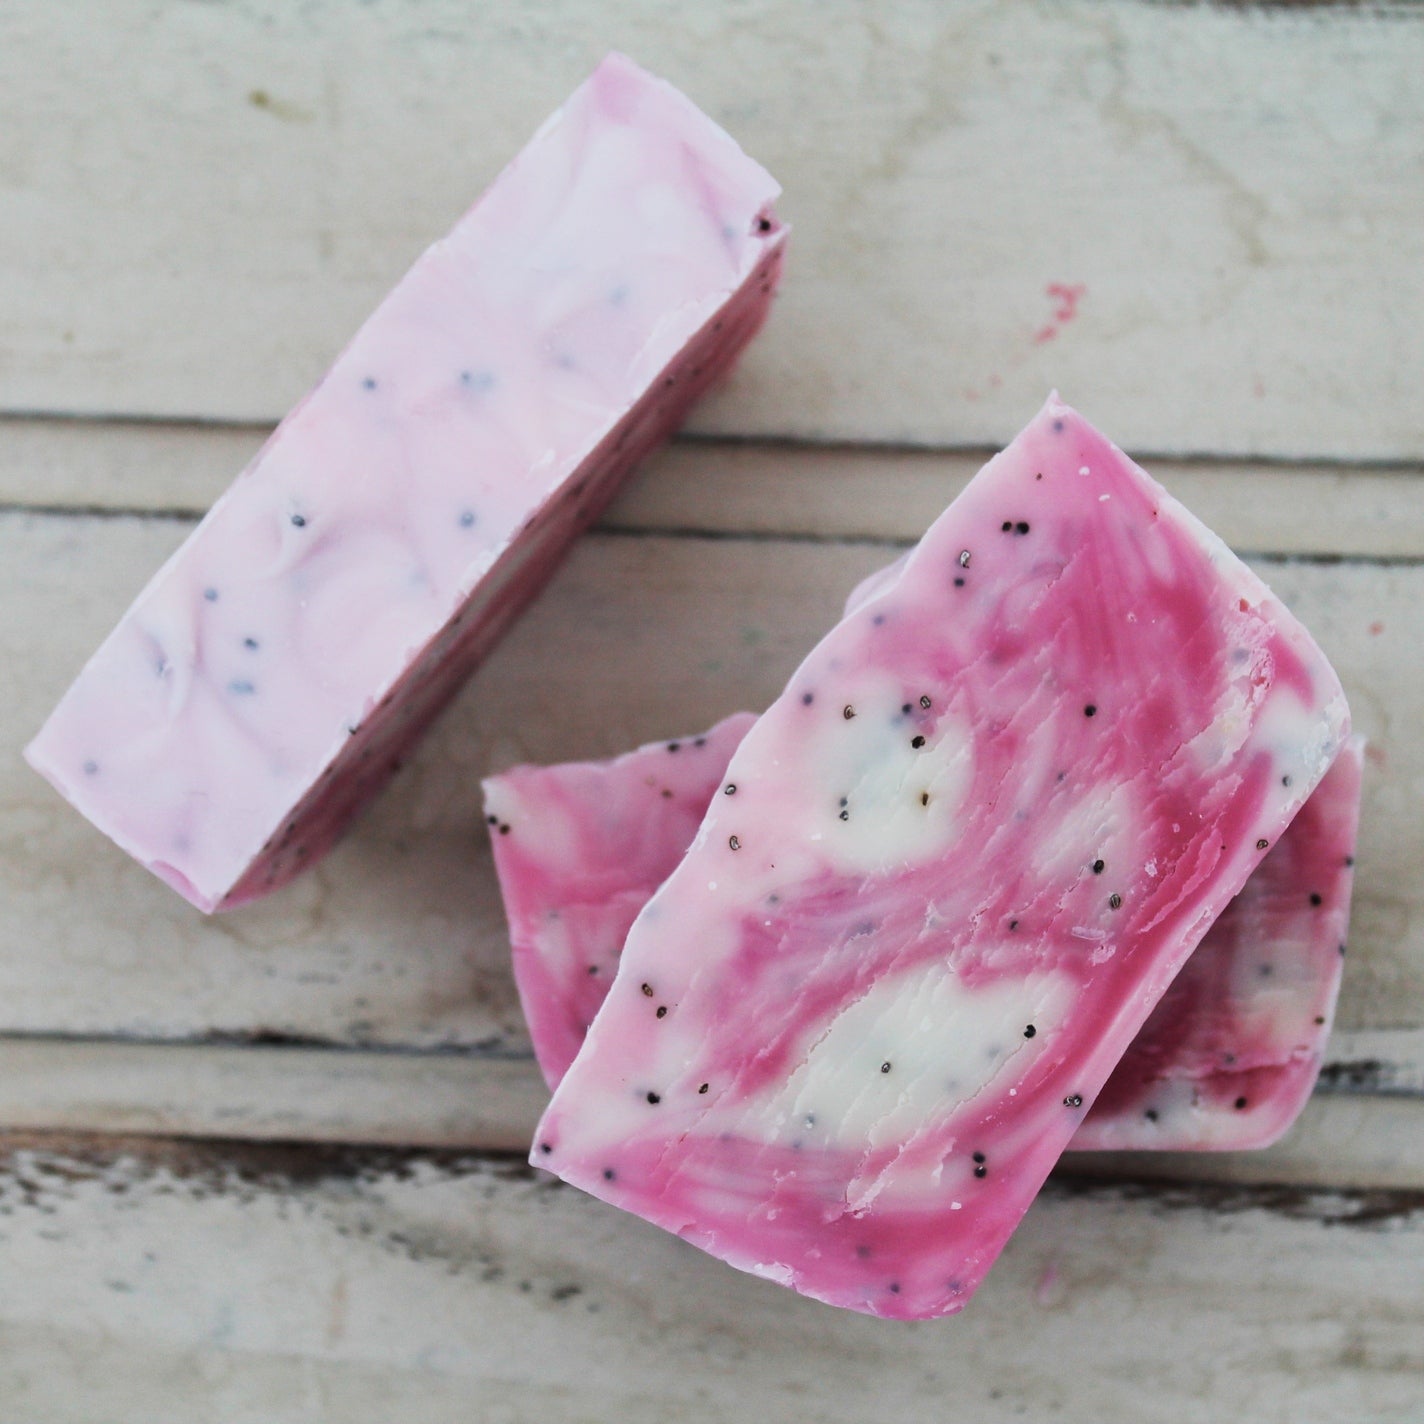 Pink and white swirled soap bars with poppy seeds on whitewashed background